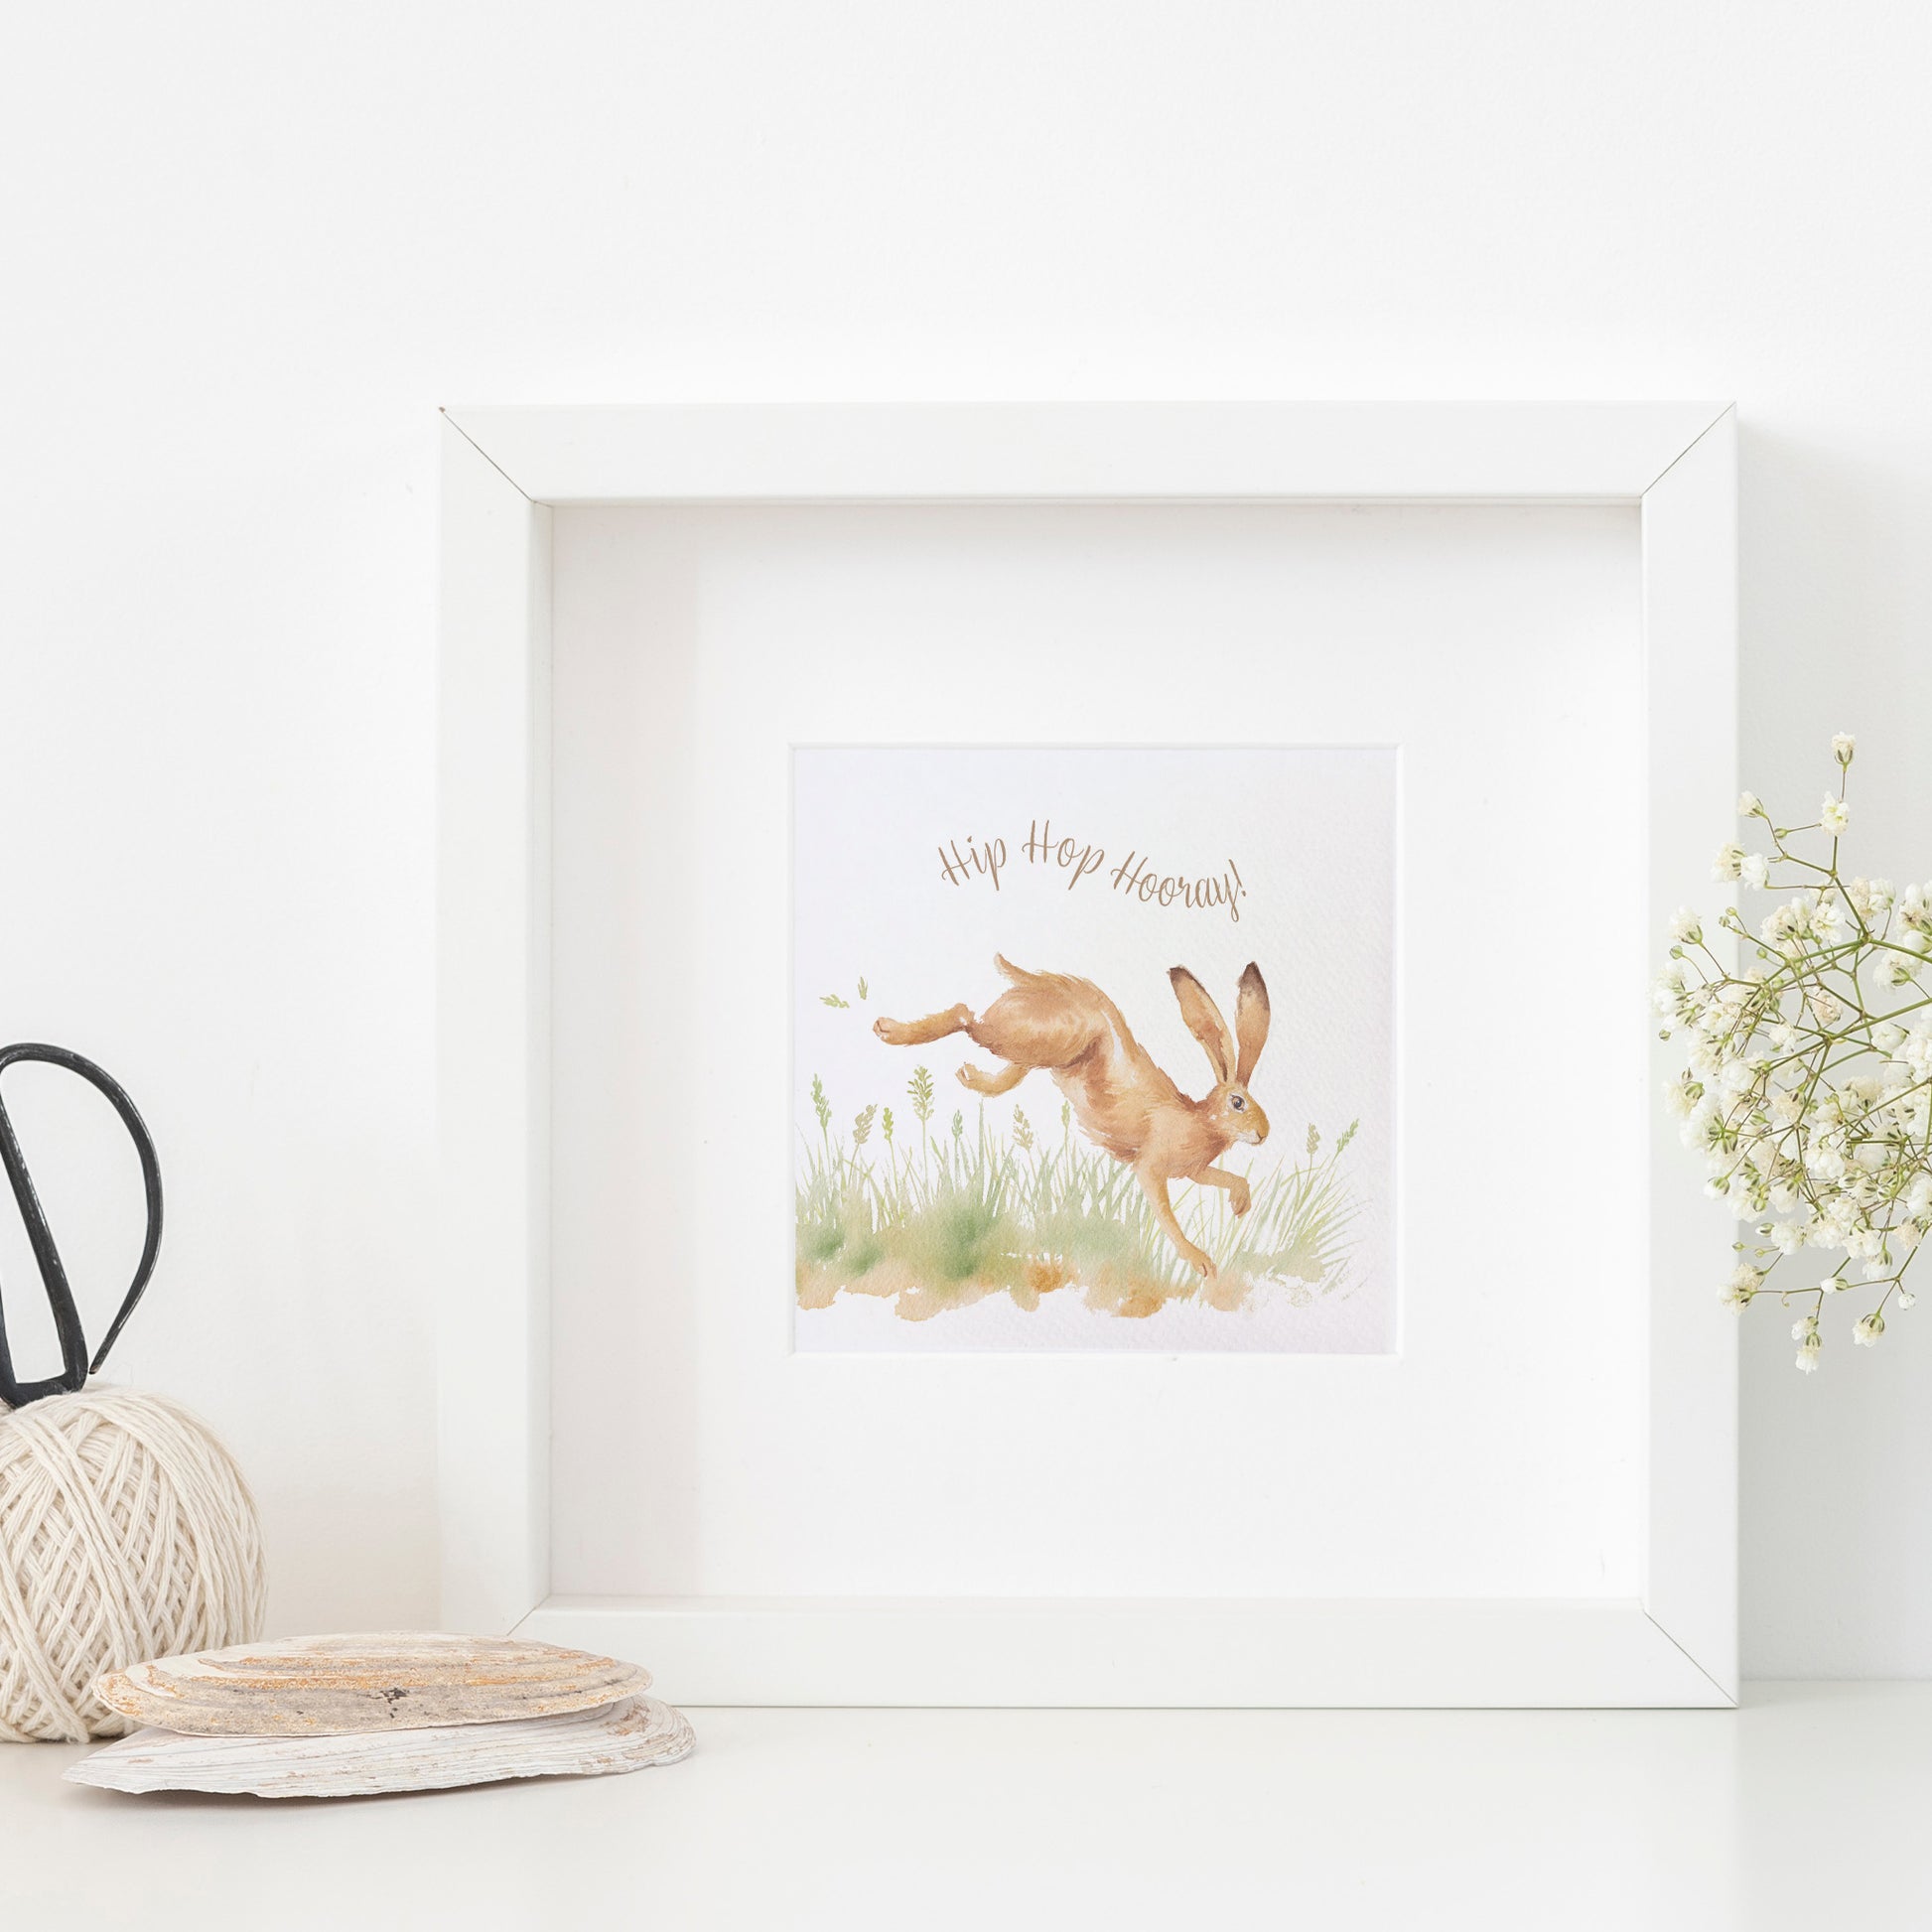 A greetings card displayed as an art print in a white frame propped up on a shelf next to a plant. The card reads Hip Hop Hooray in brown text above a leaping hare in a watercolour style.